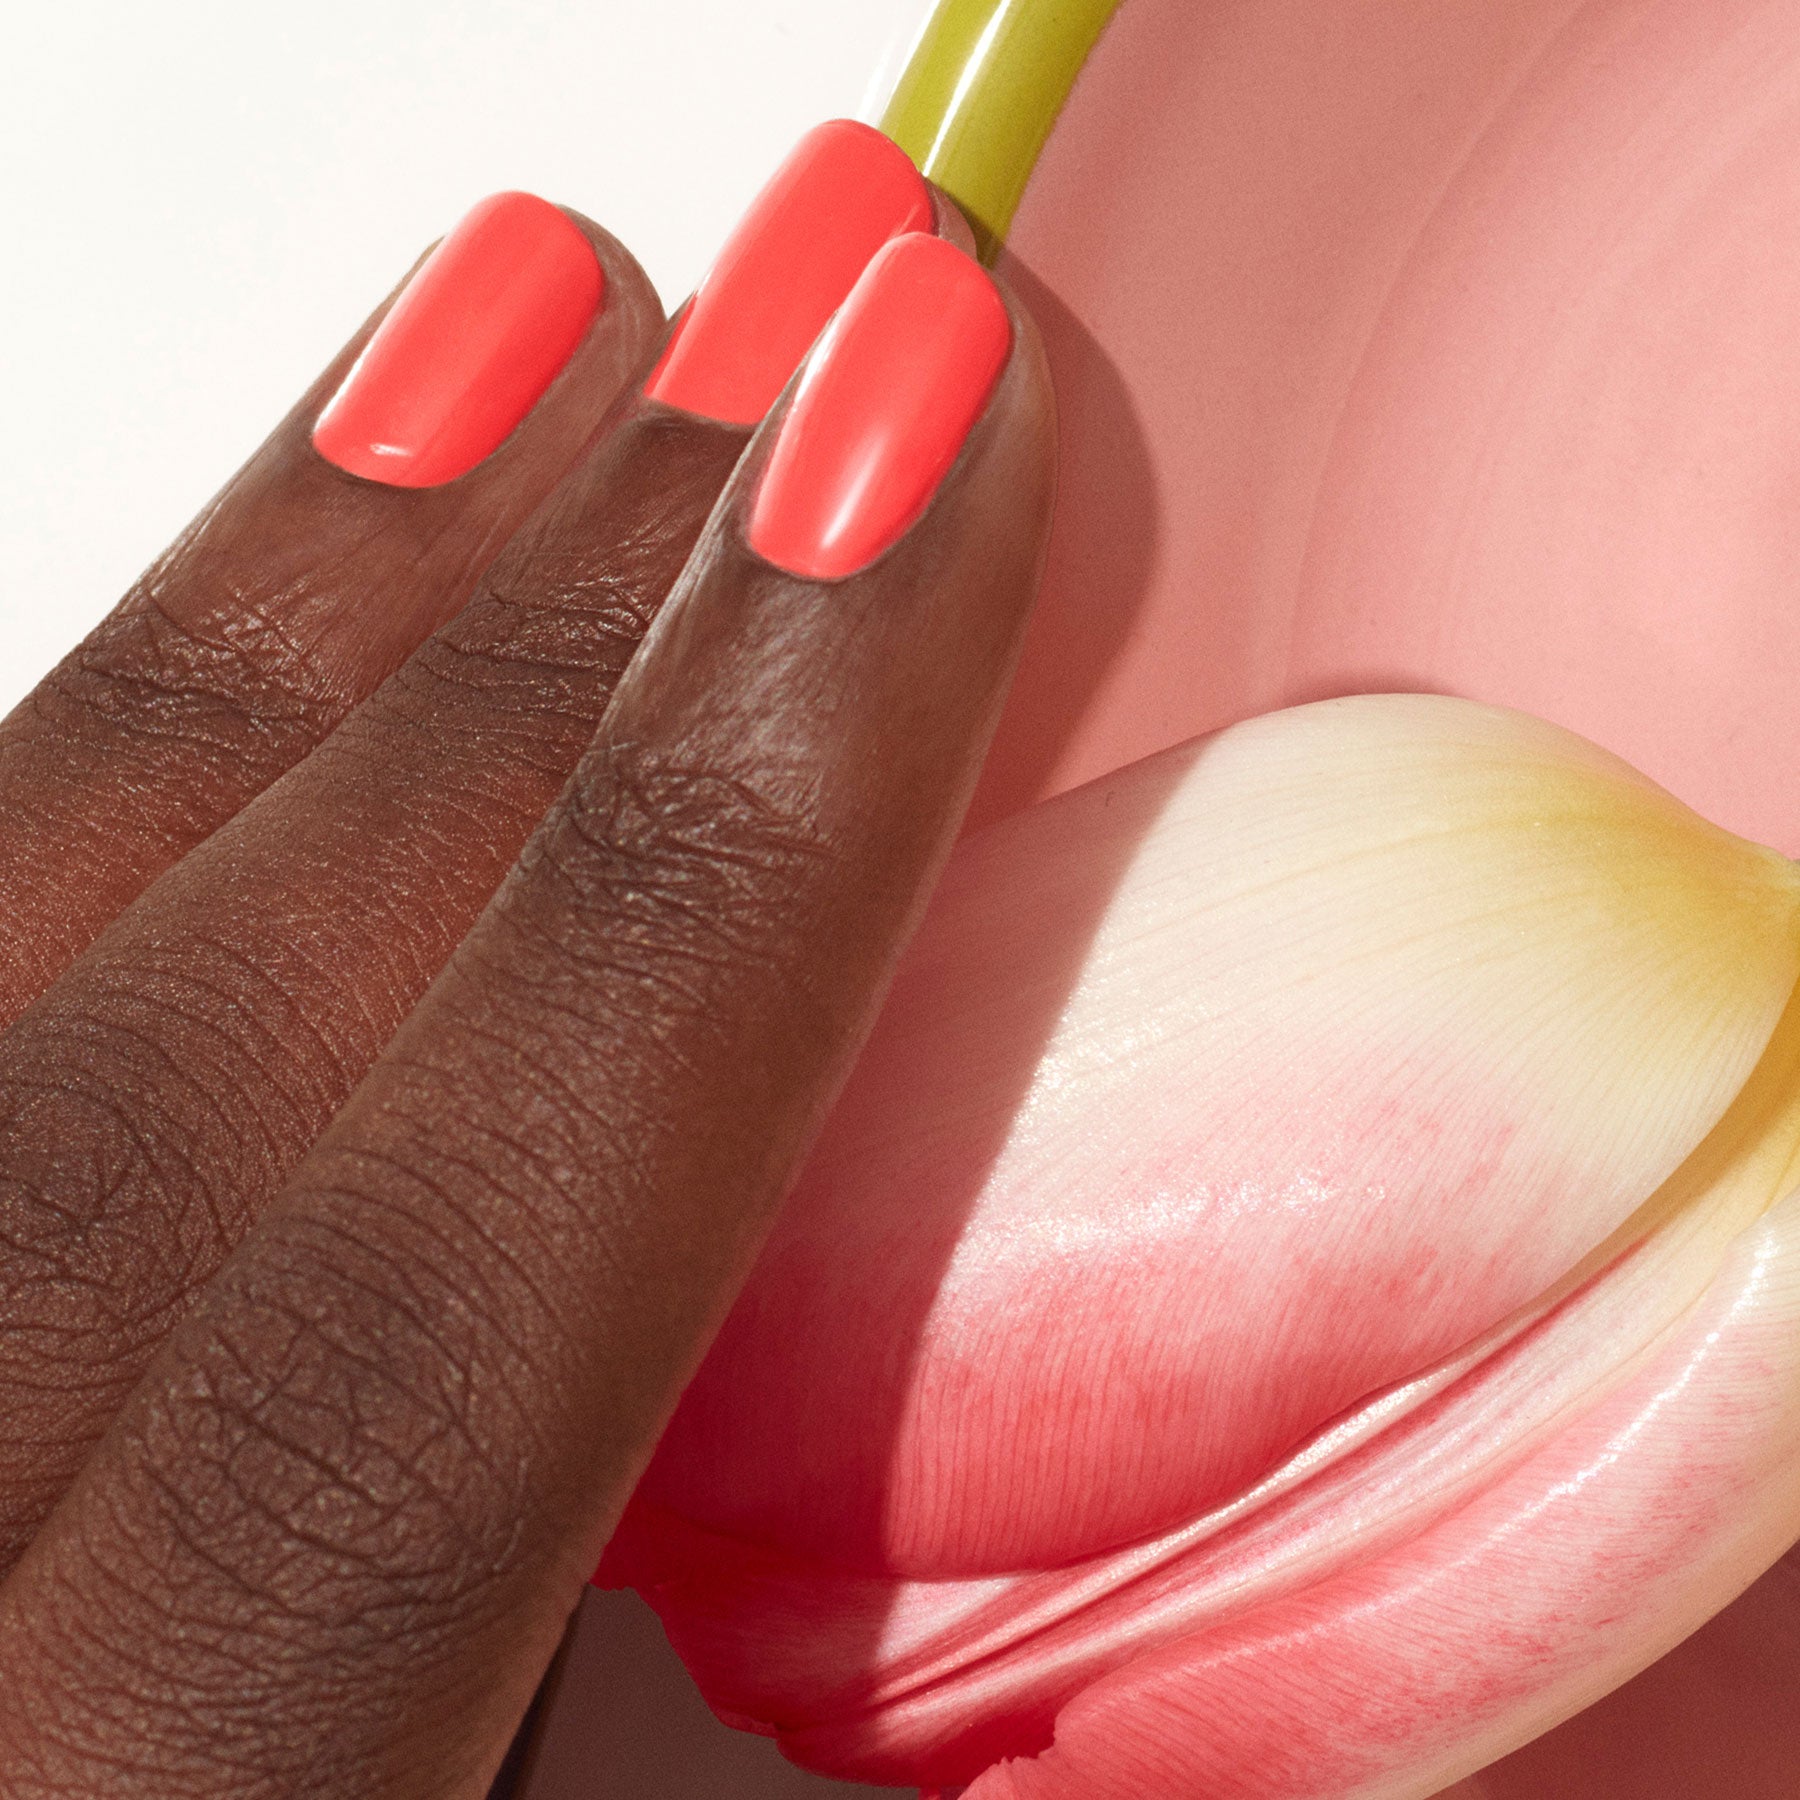 PAINT NAIL BAR St. Pete - On a journey for stronger, healthier, and longer  nails? No problem! Sculpted gel nails are the healthier and modern  alternative to acrylic nails. 🇽 No Formaldehyde,